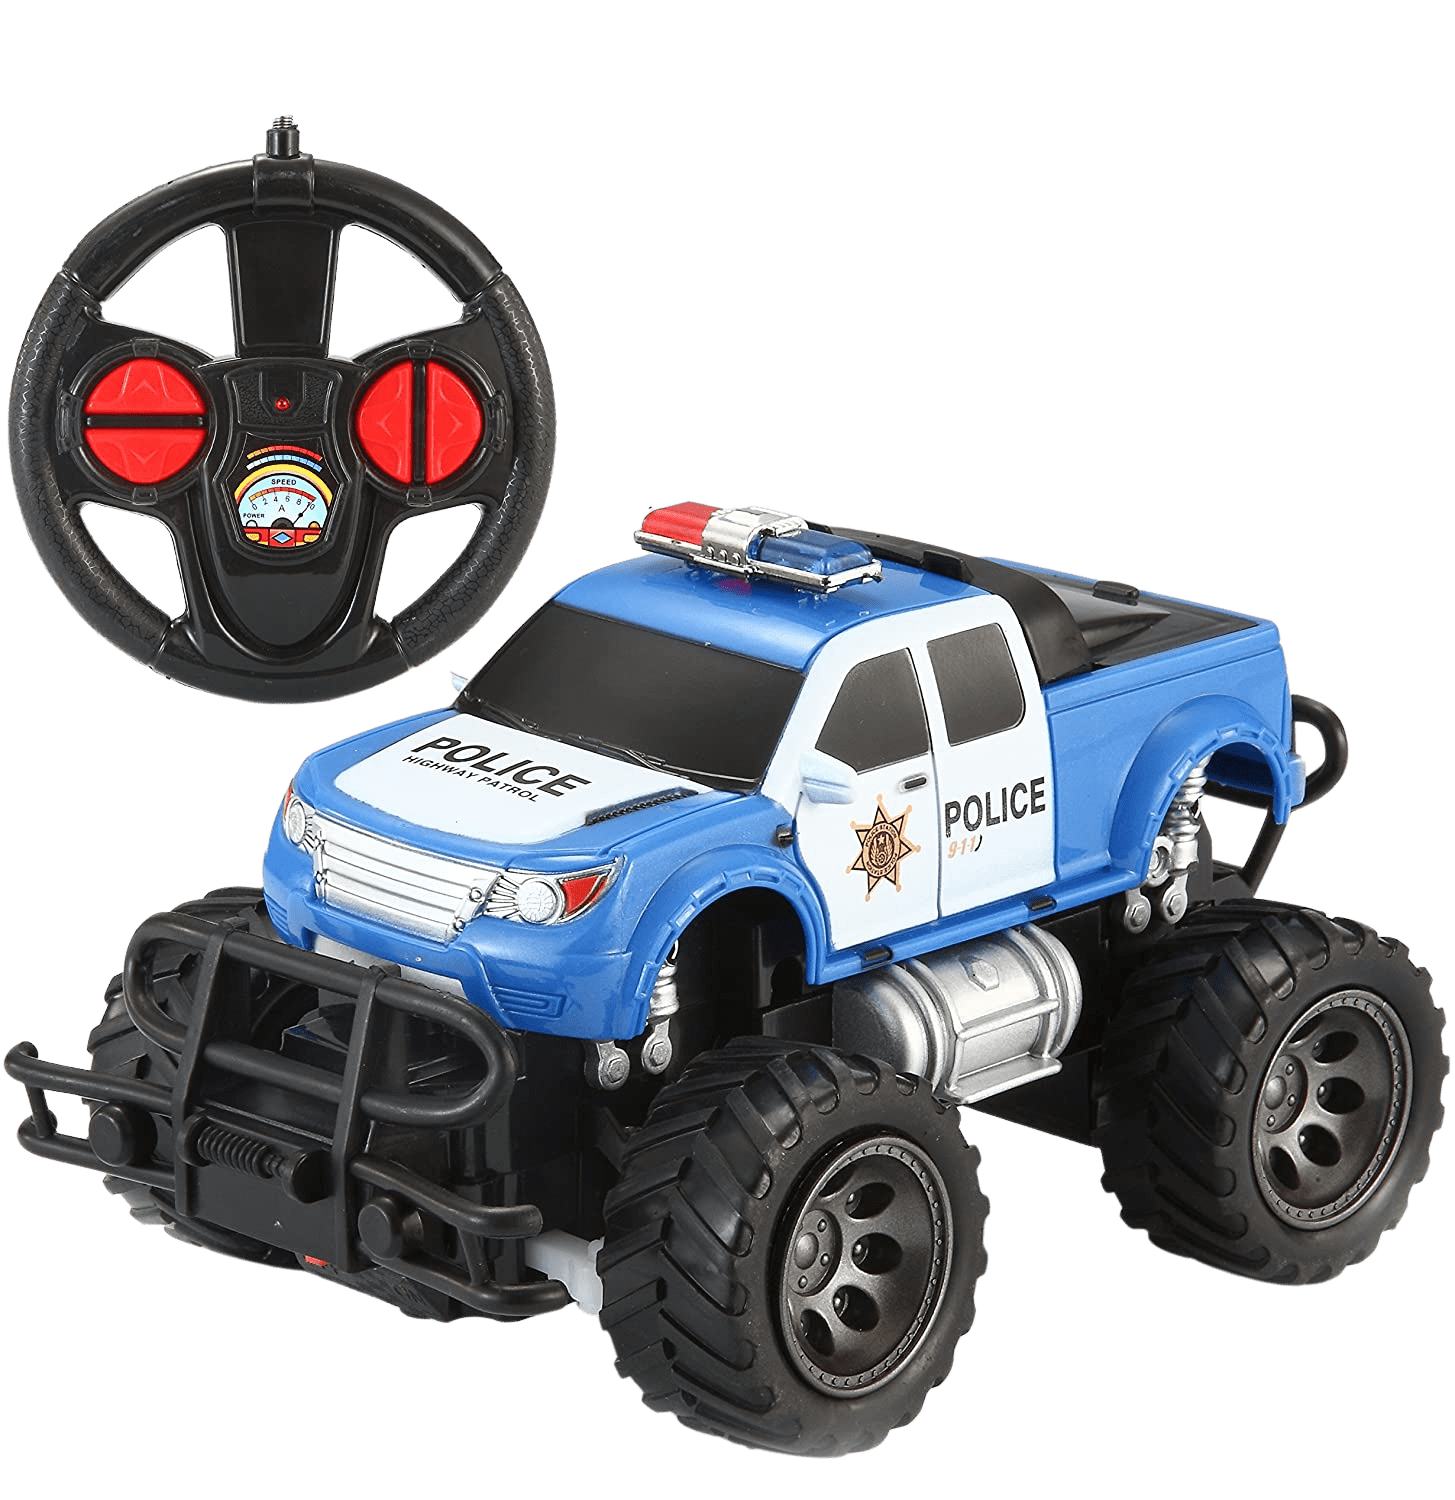 Joyin Toy RC Remote Control Police Car Monster Truck Radio Control Kids Police Toy Cars | Decor Gifts and More